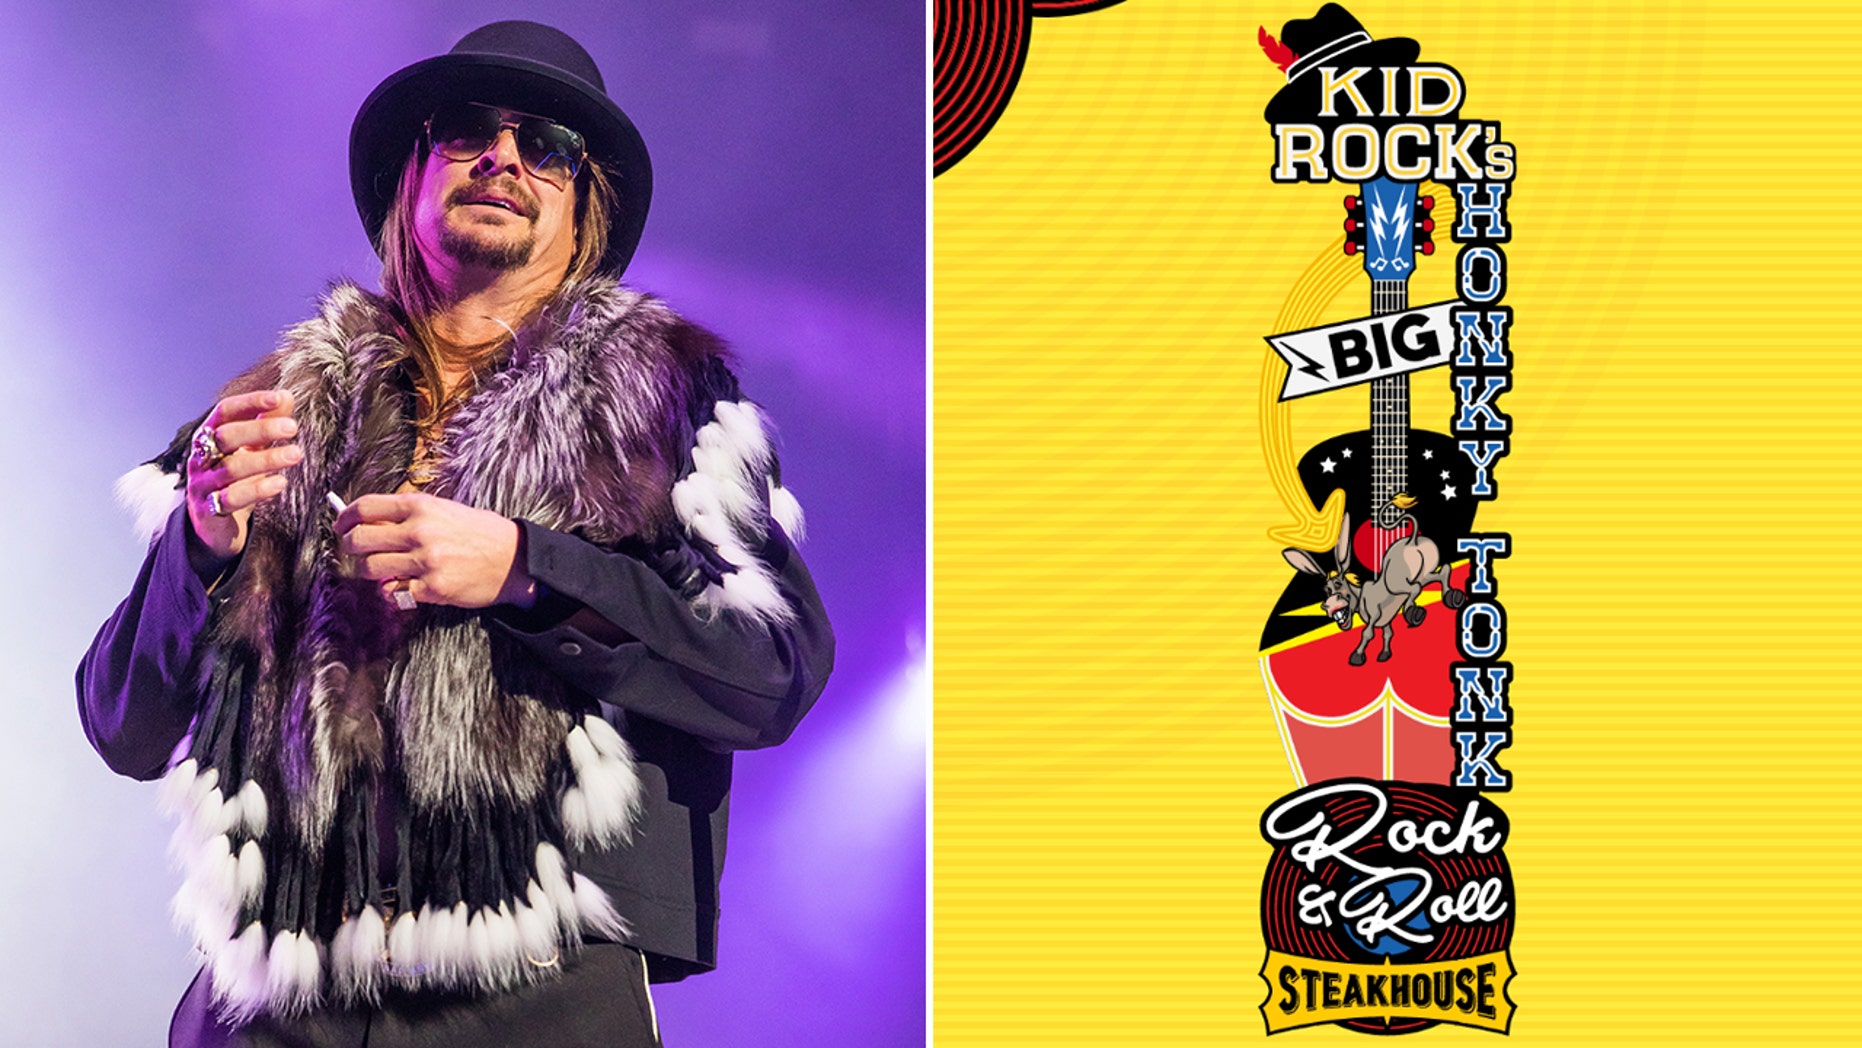 Kid Rock's Nashville bar will be allowed to use signage, despite